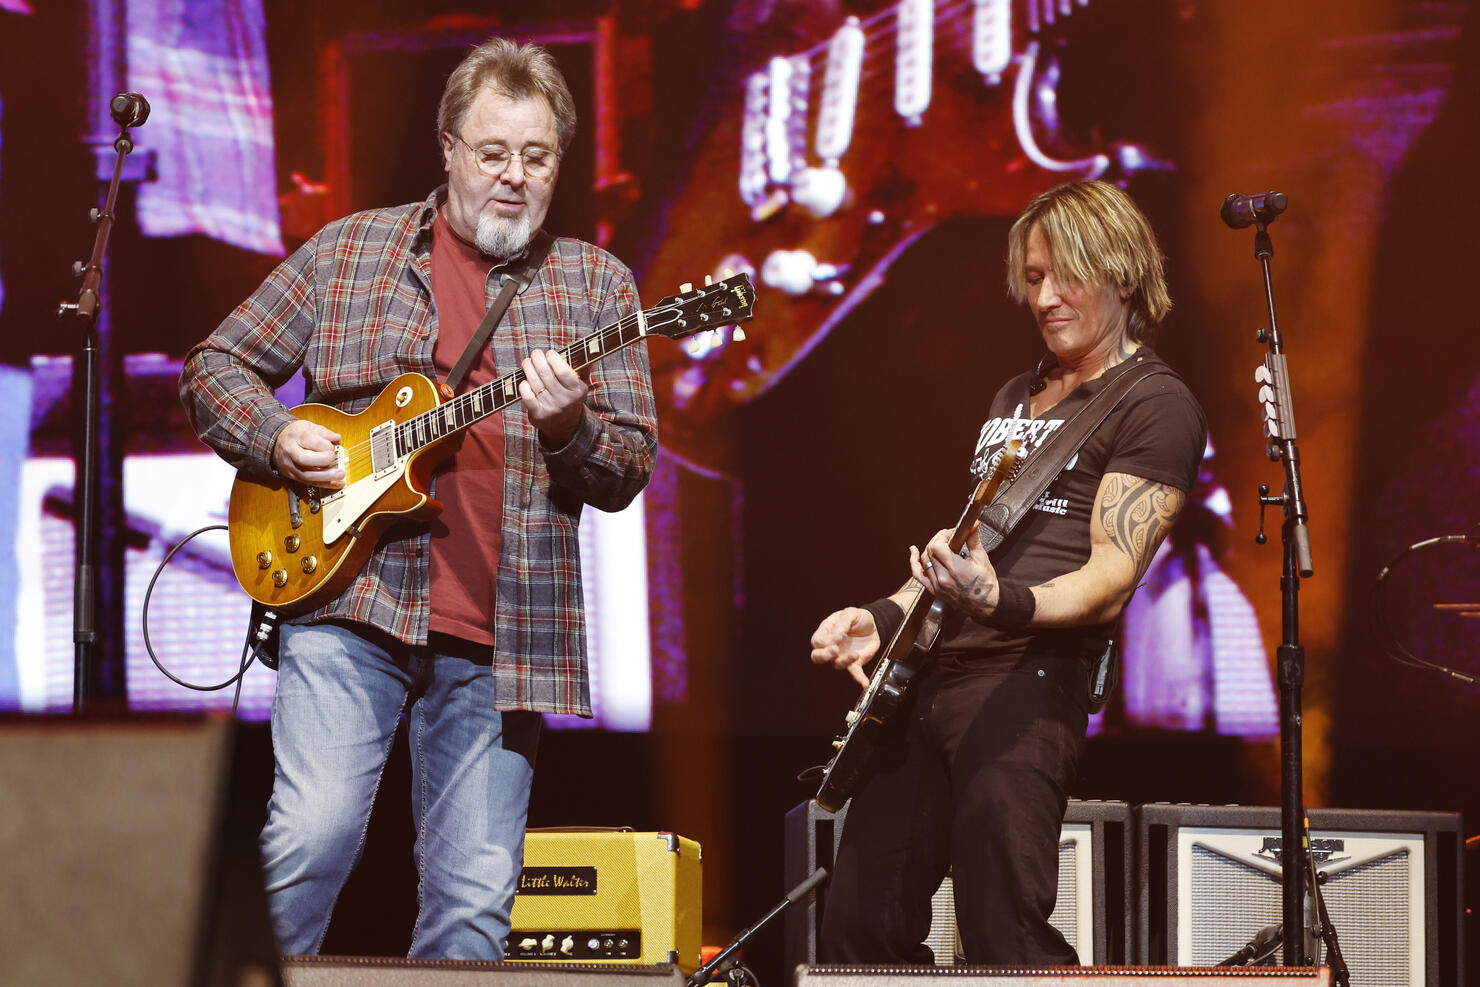 Keith Urban and Vince Gill Return to Nashville's Bridgestone Arena for Urban's All for the Hall Concert Benefiting the Country Music Hall of Fame and Museum